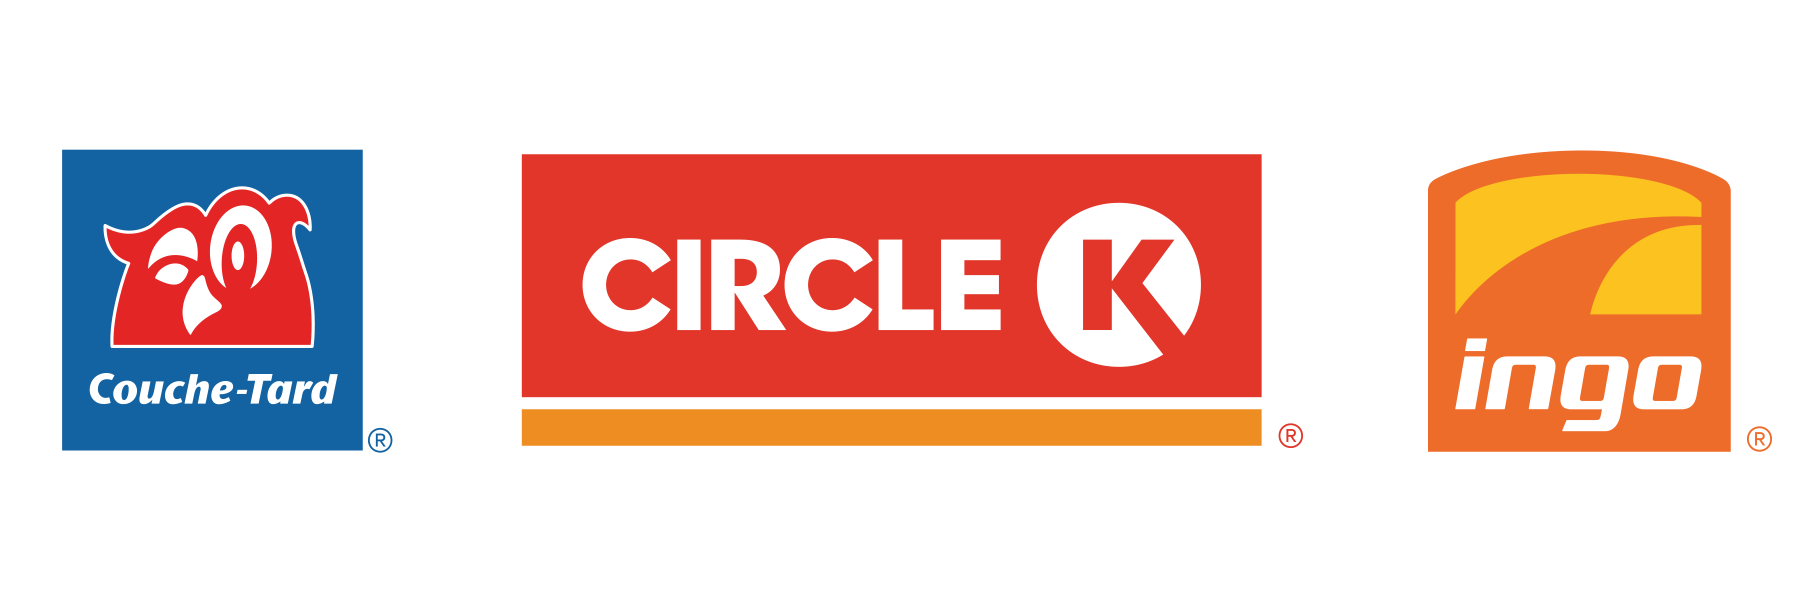 Circle K and other brand logos for Couche-tard and ingo